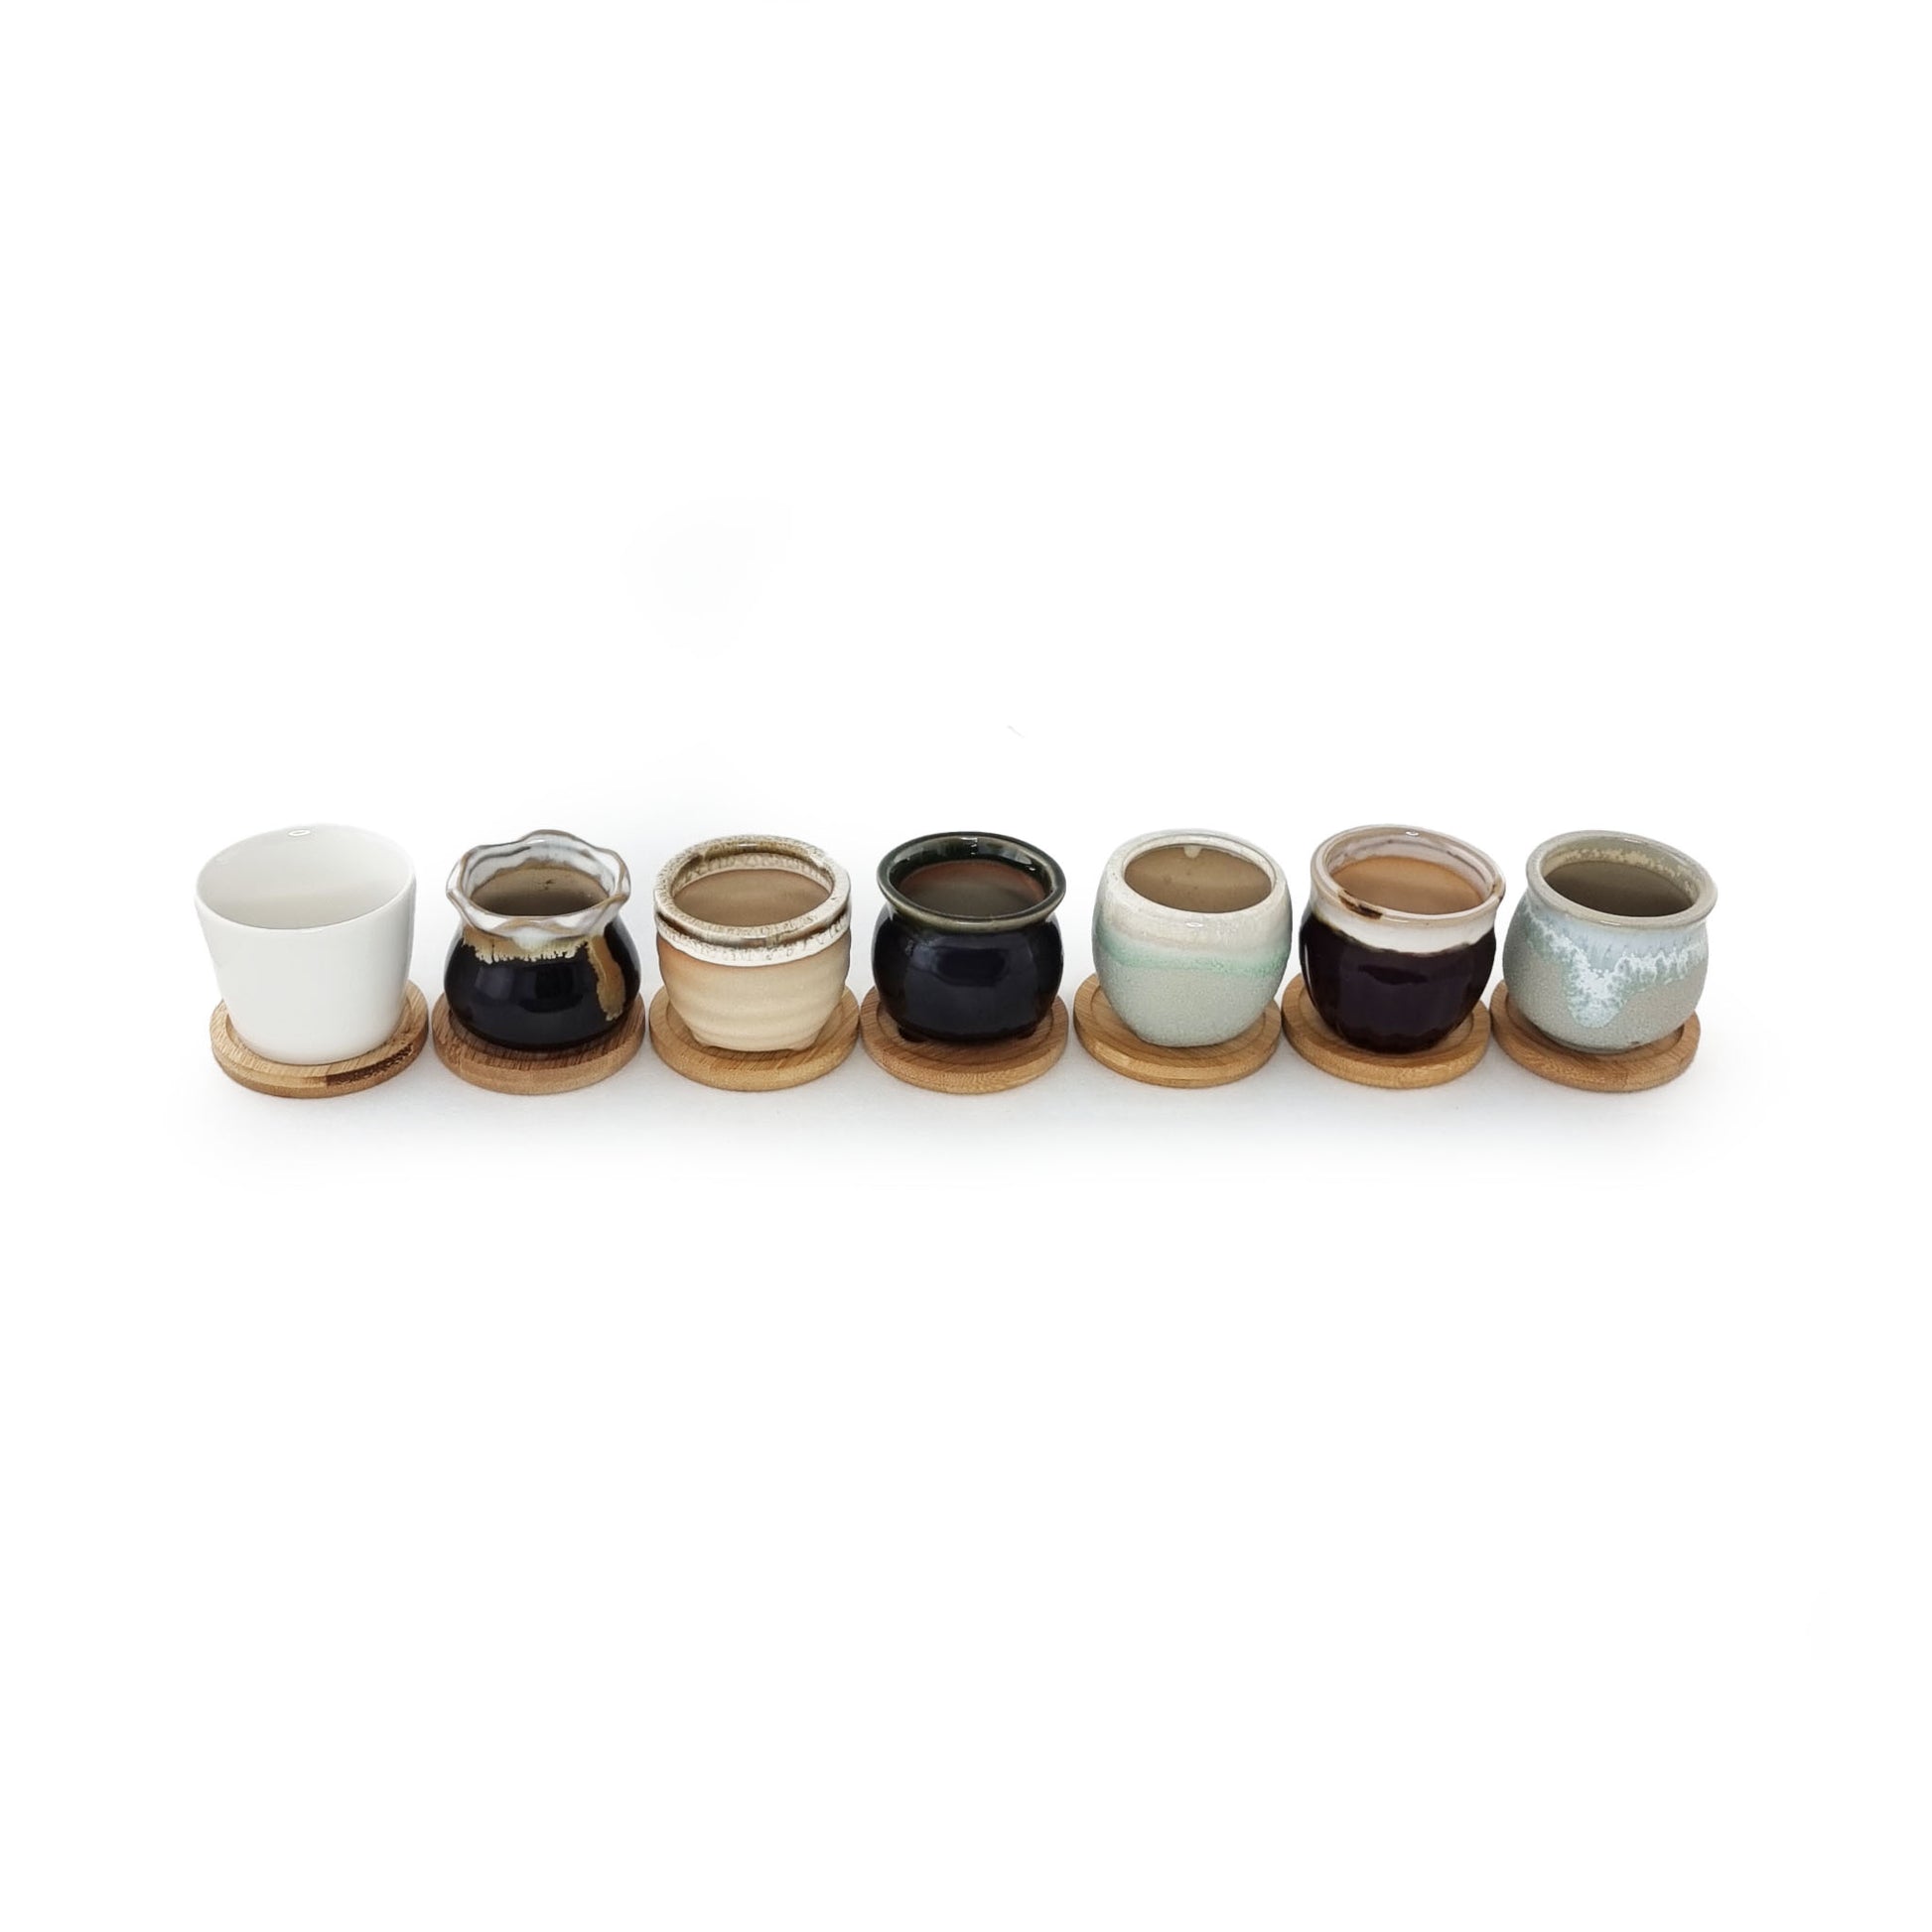 1 white and 6 different glaze painted pots styles with bamboo drip trays side by side